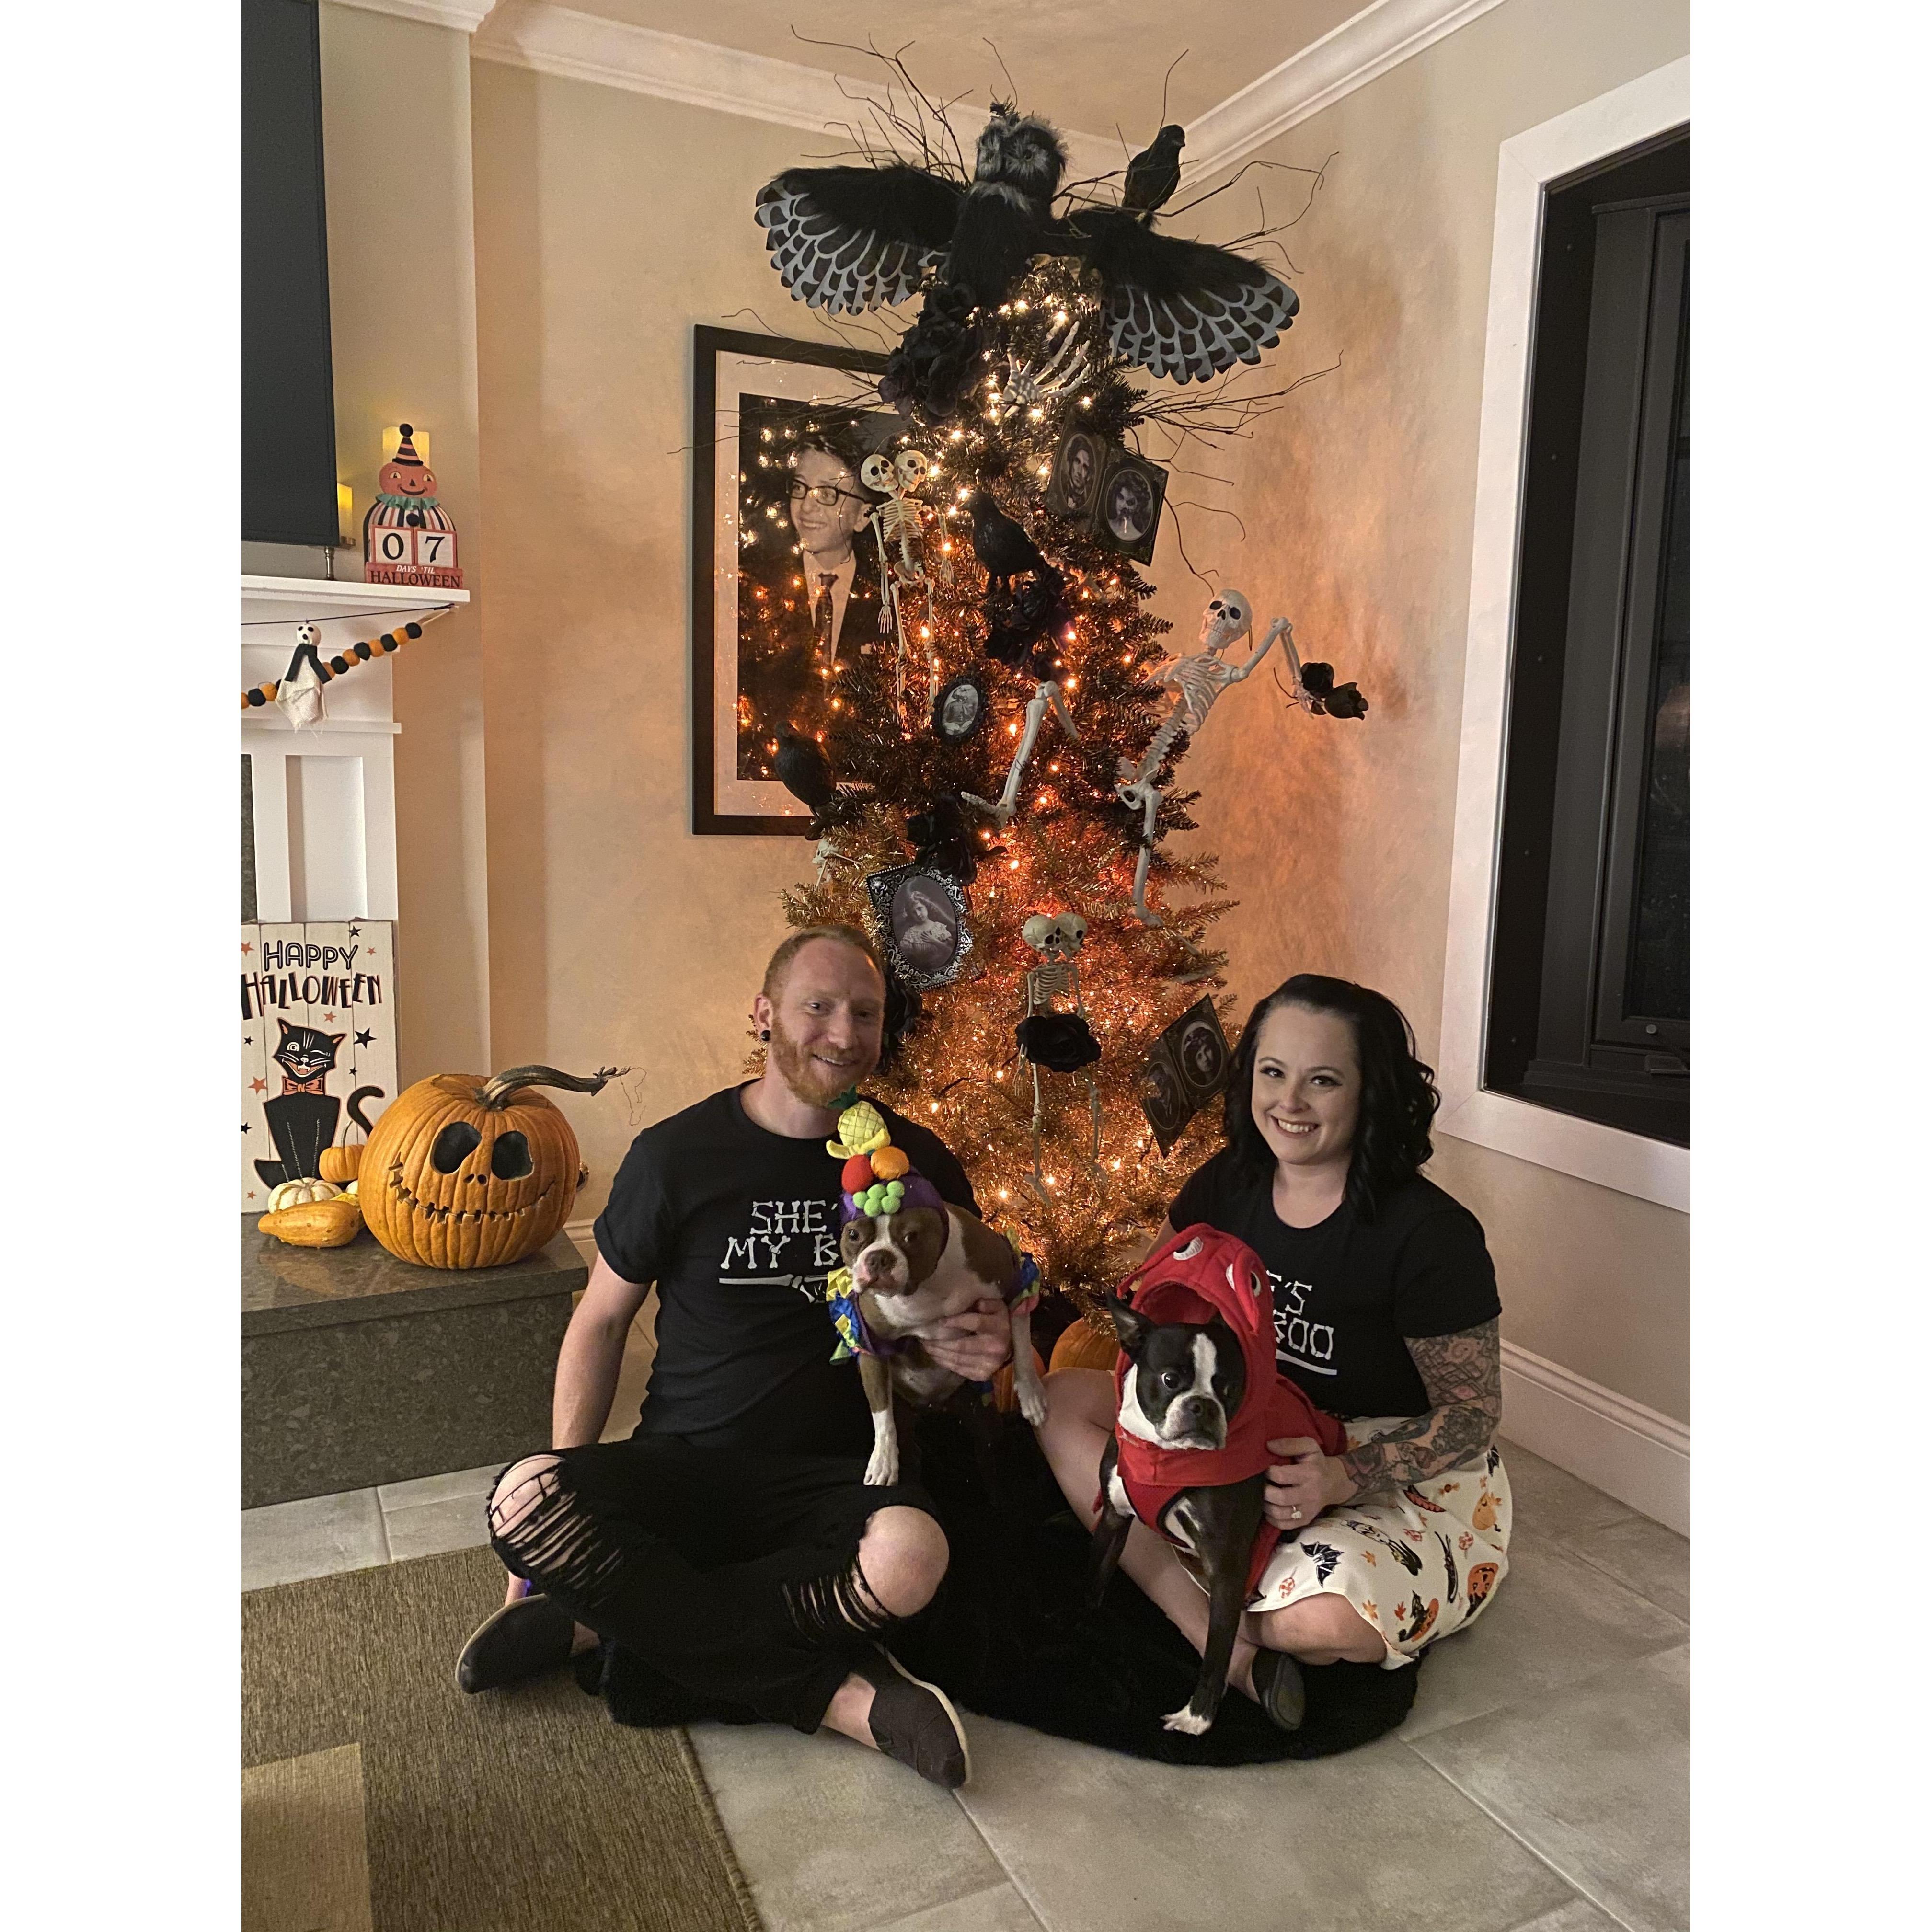 It ain’t Halloween without a Halloween tree!